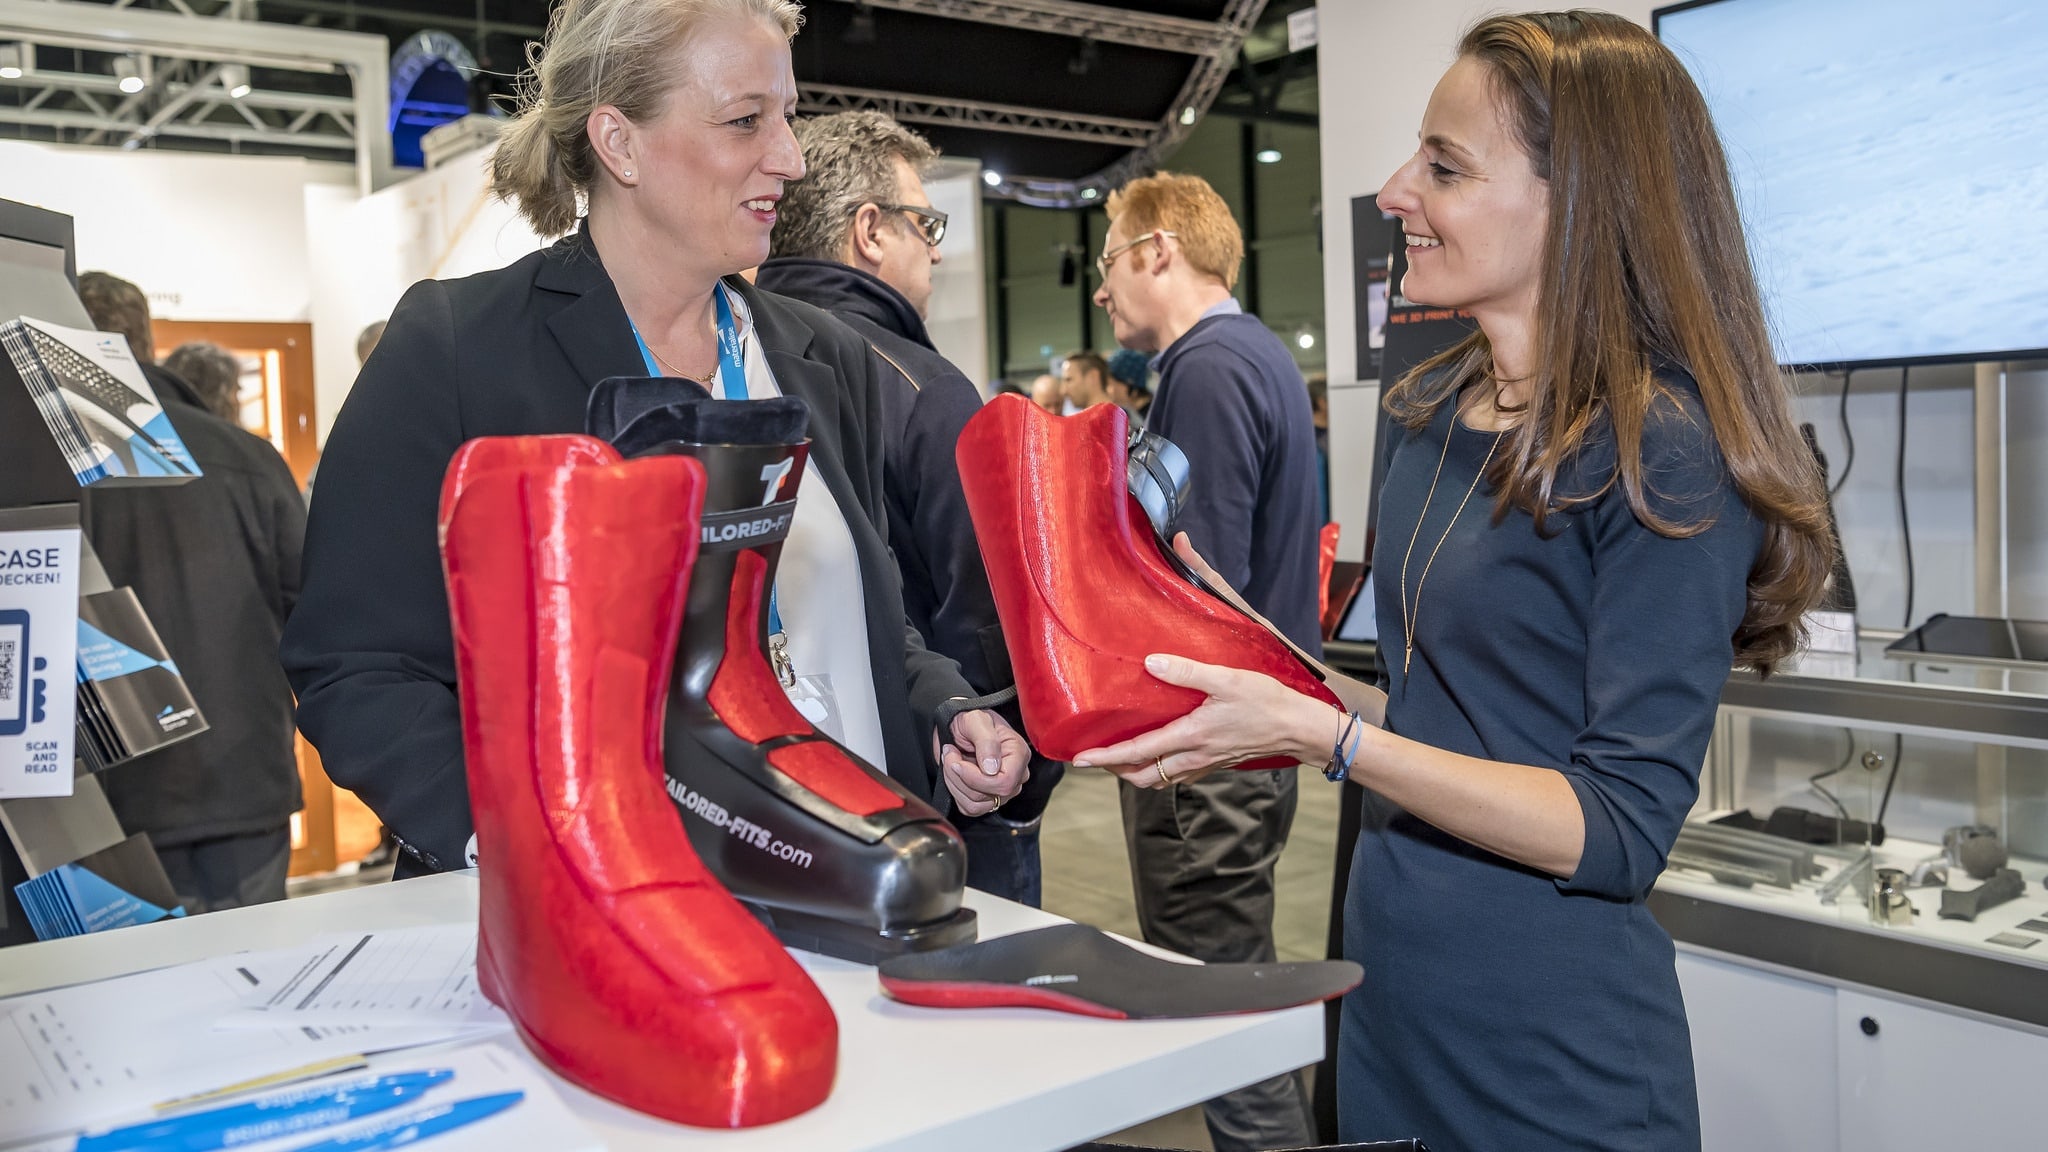 The exhibitors presented real application examples (showcases) - here a 3D printed ski boot.